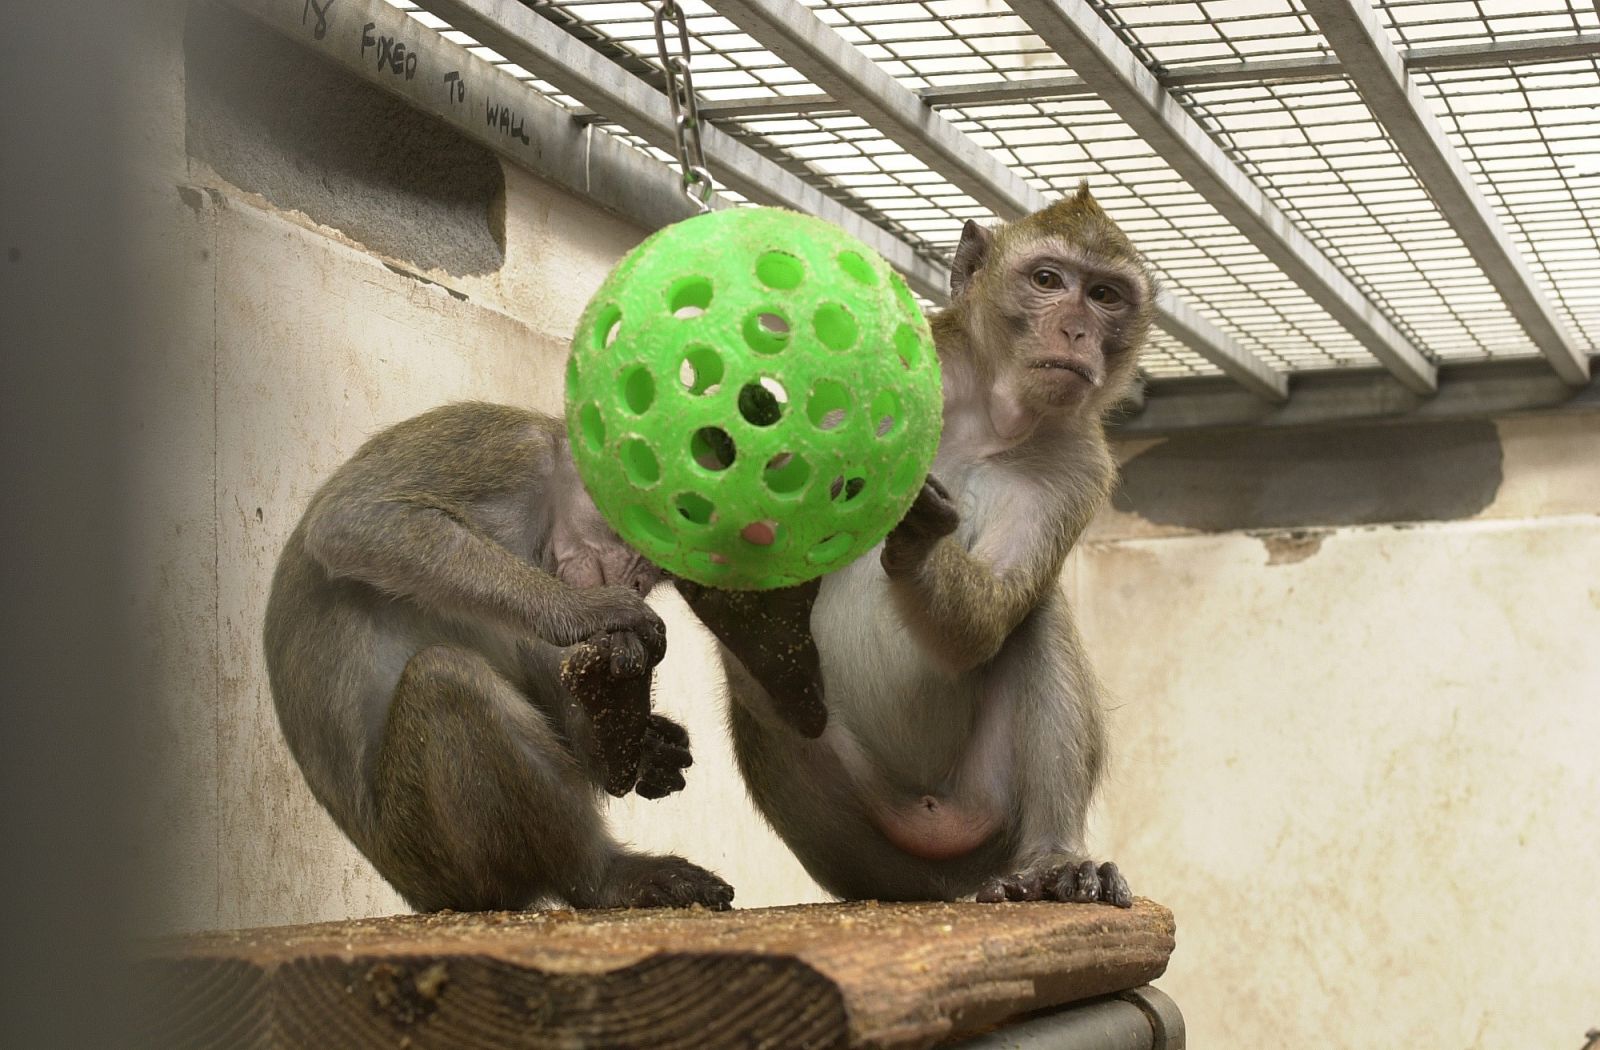 Pair of macaques play with ball